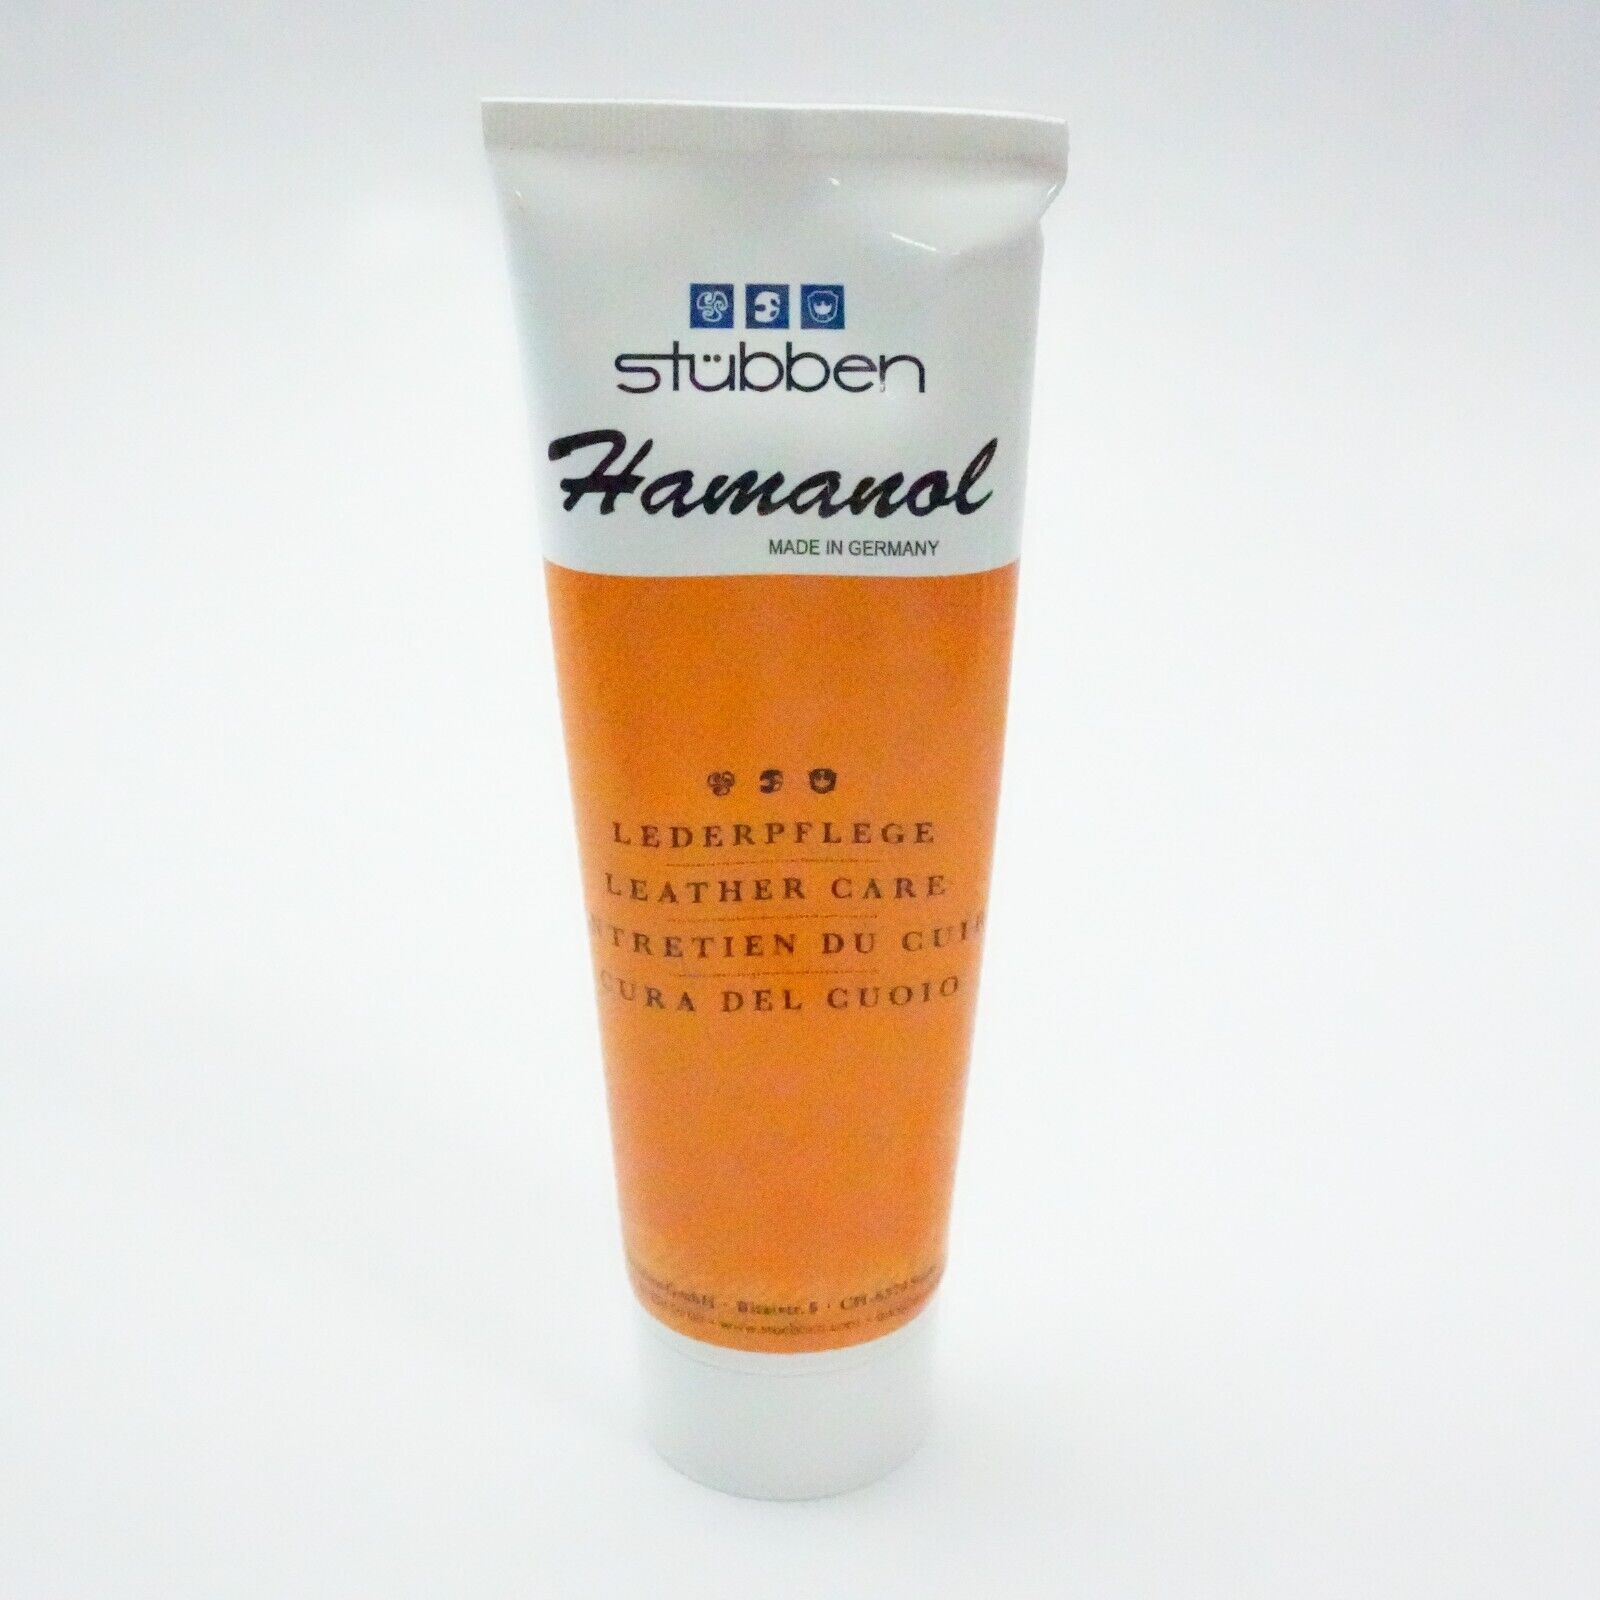 Stubben Hamanol Leather Care Tube 250g - Leather Cream & Cleaner Dressing Stubben Does Not Apply